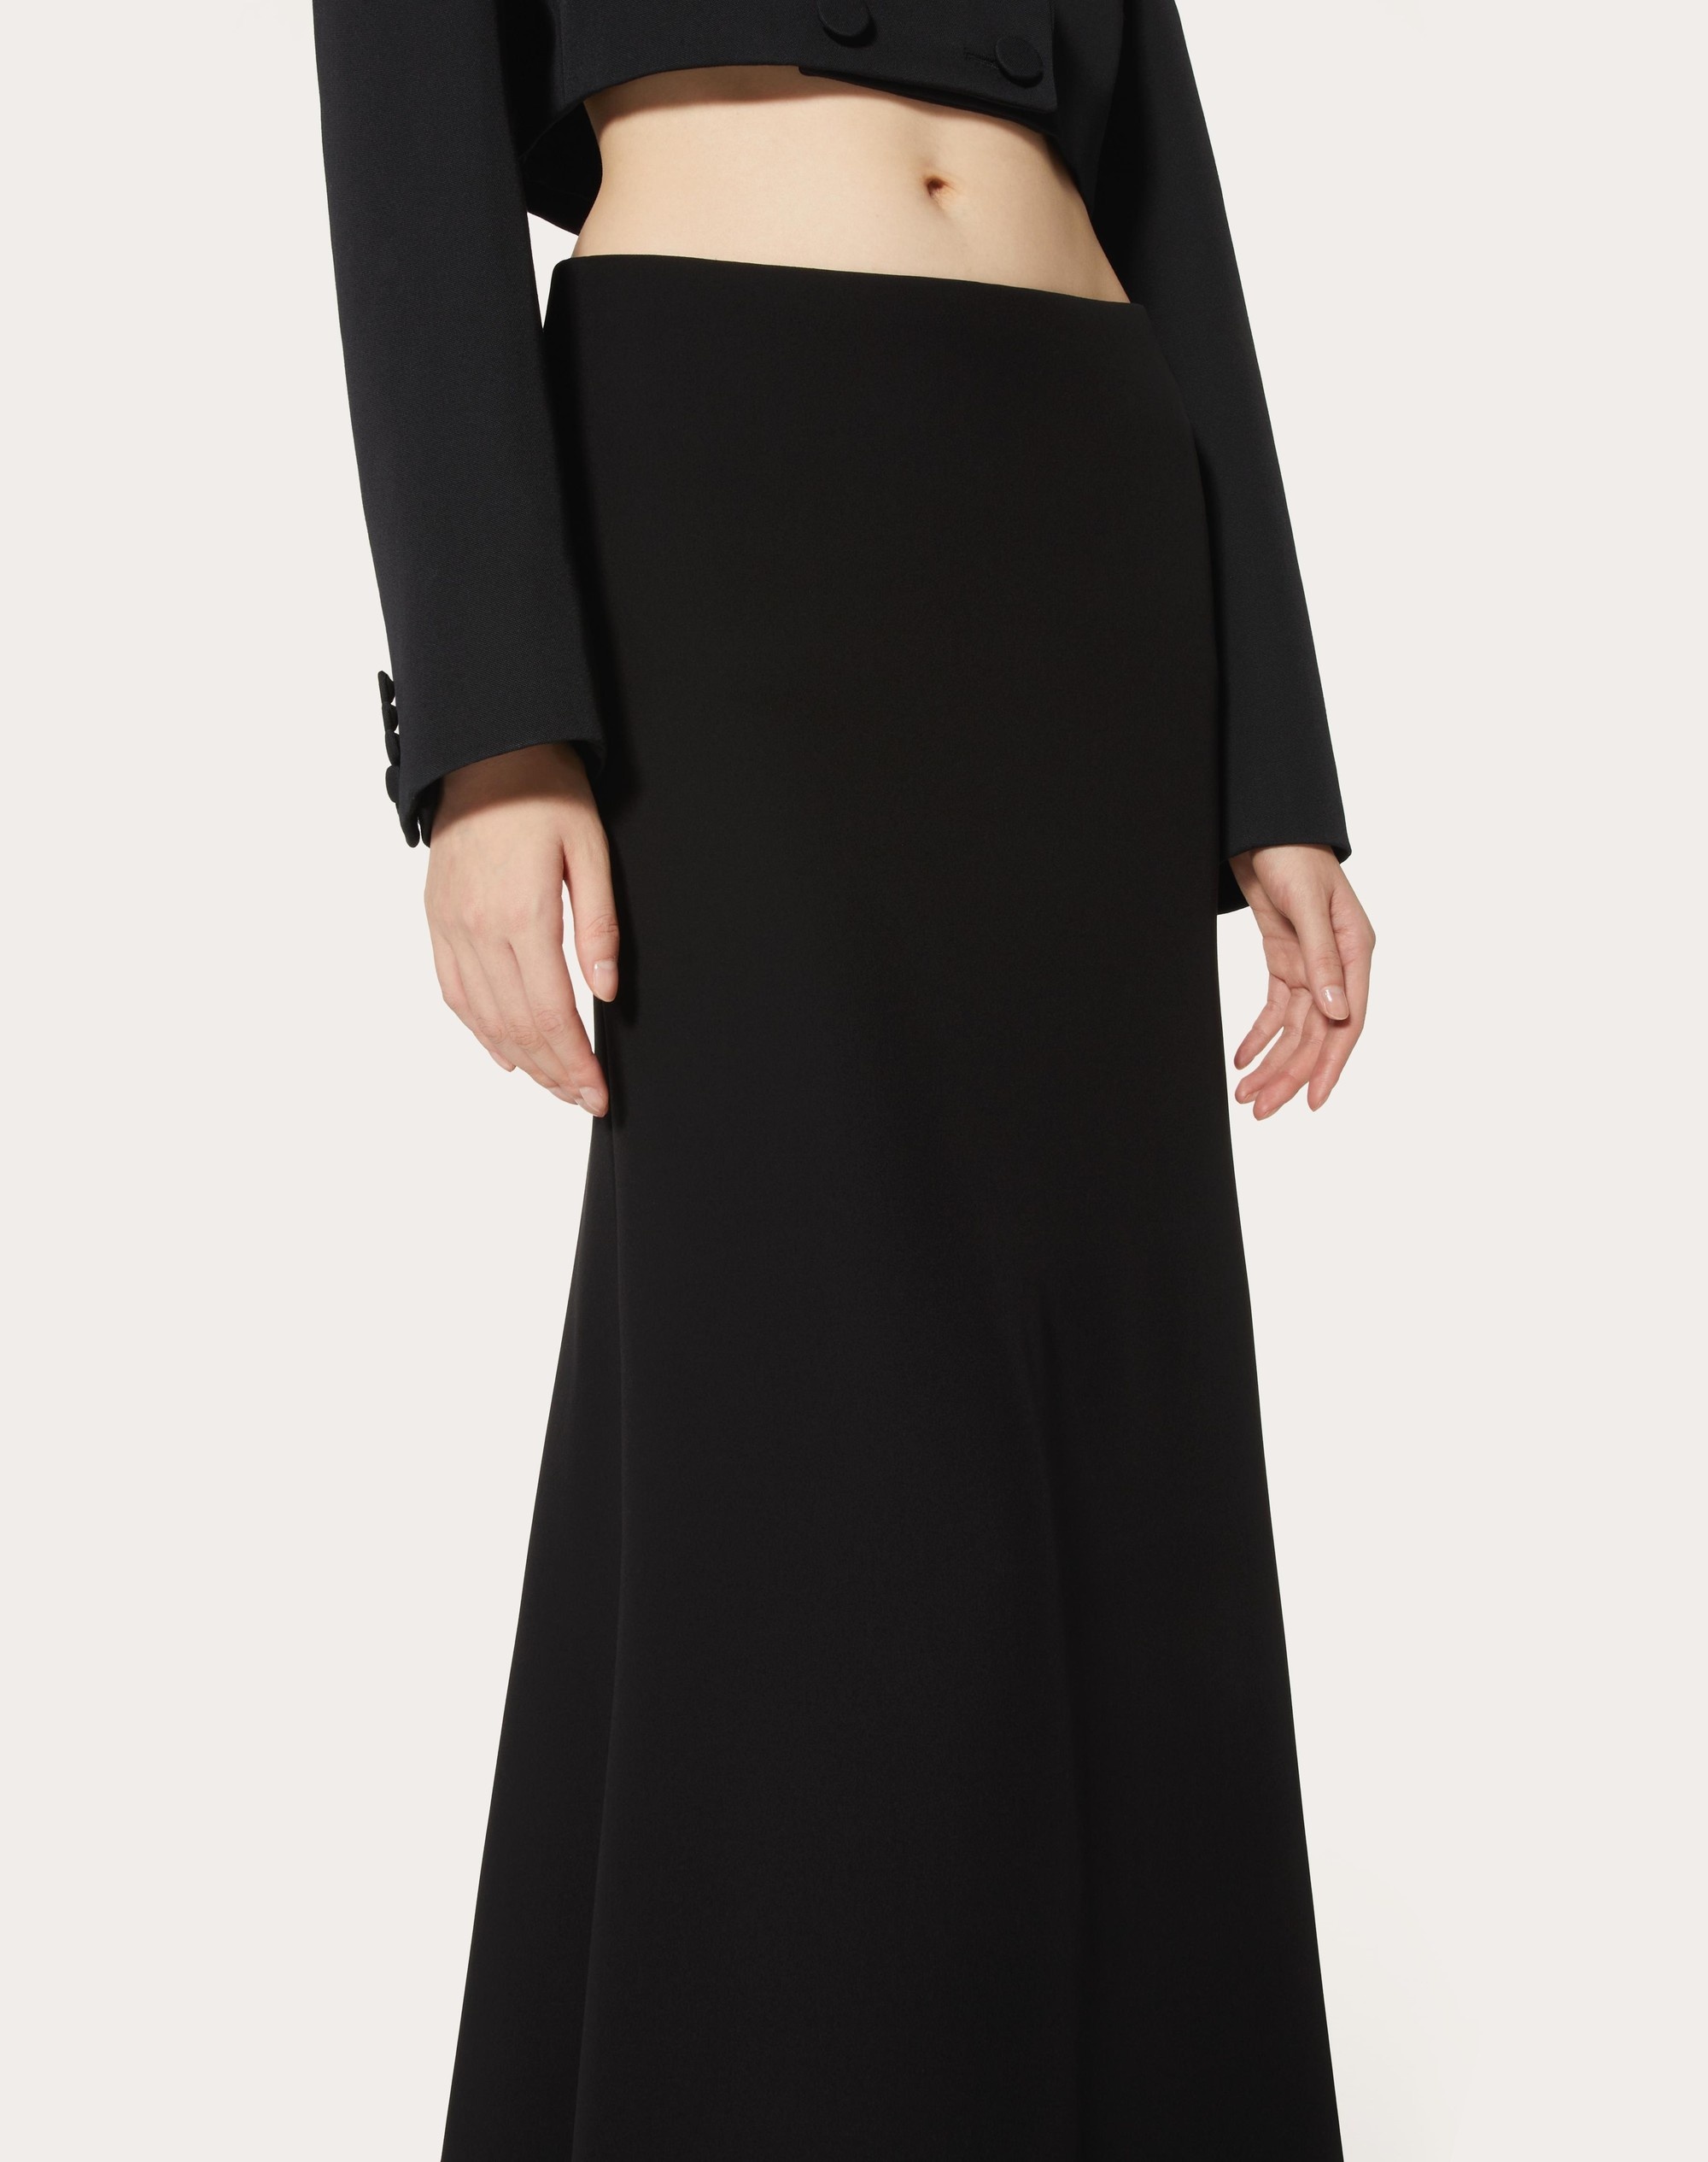 CADY COUTURE LONG SKIRT - 5